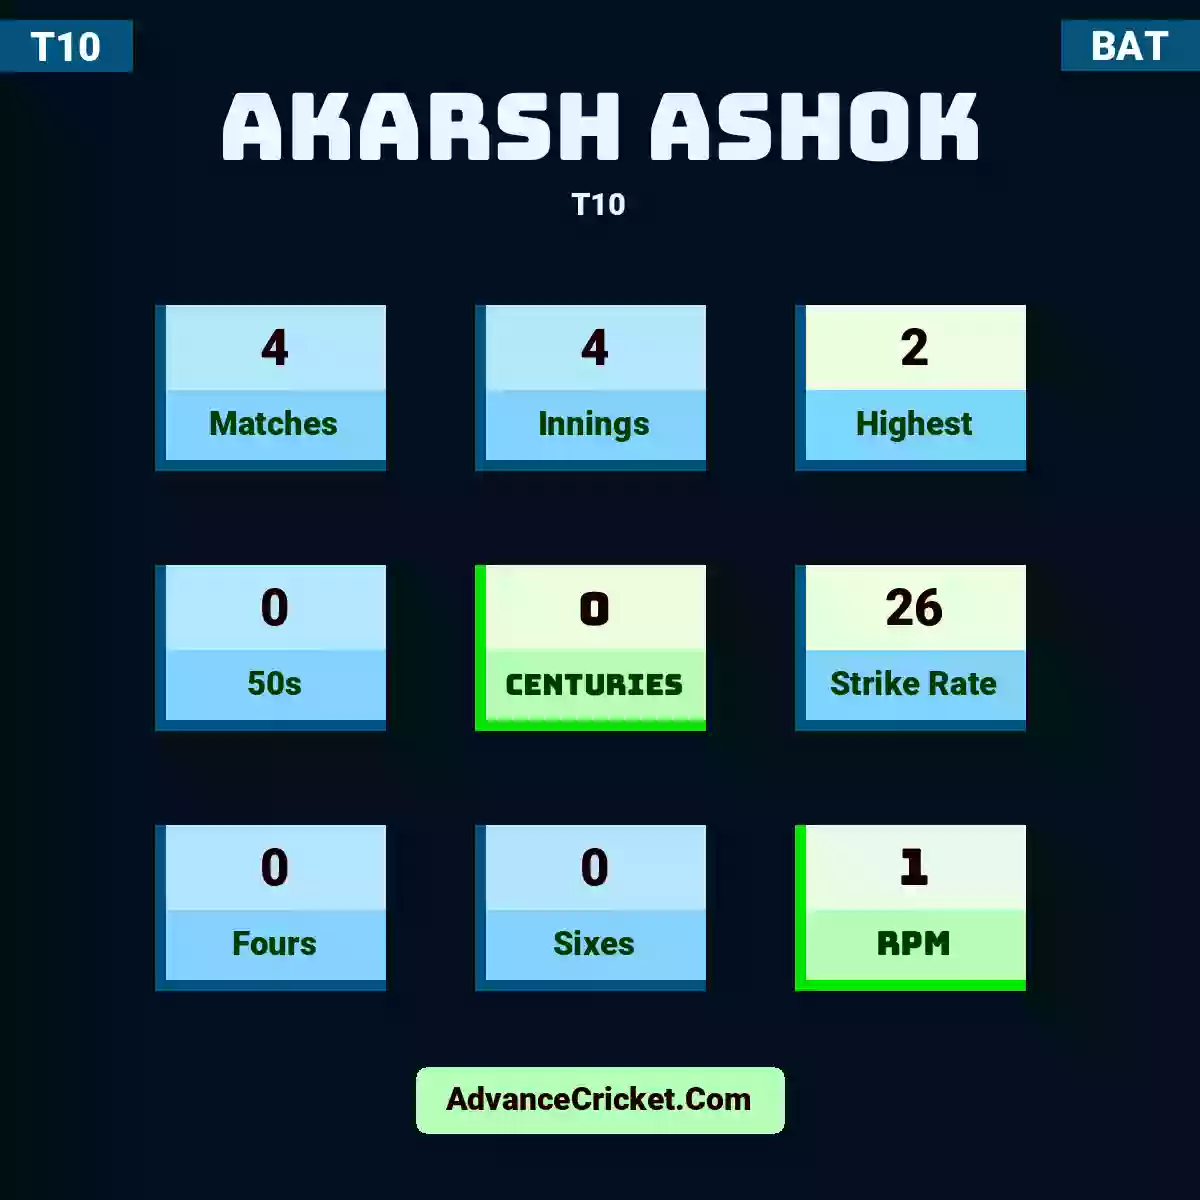 Akarsh Ashok T10 , Akarsh Ashok played 4 matches, scored 2 runs as highest, 0 half-centuries, and 0 centuries, with a strike rate of 26. A.Ashok hit 0 fours and 0 sixes, with an RPM of 1.